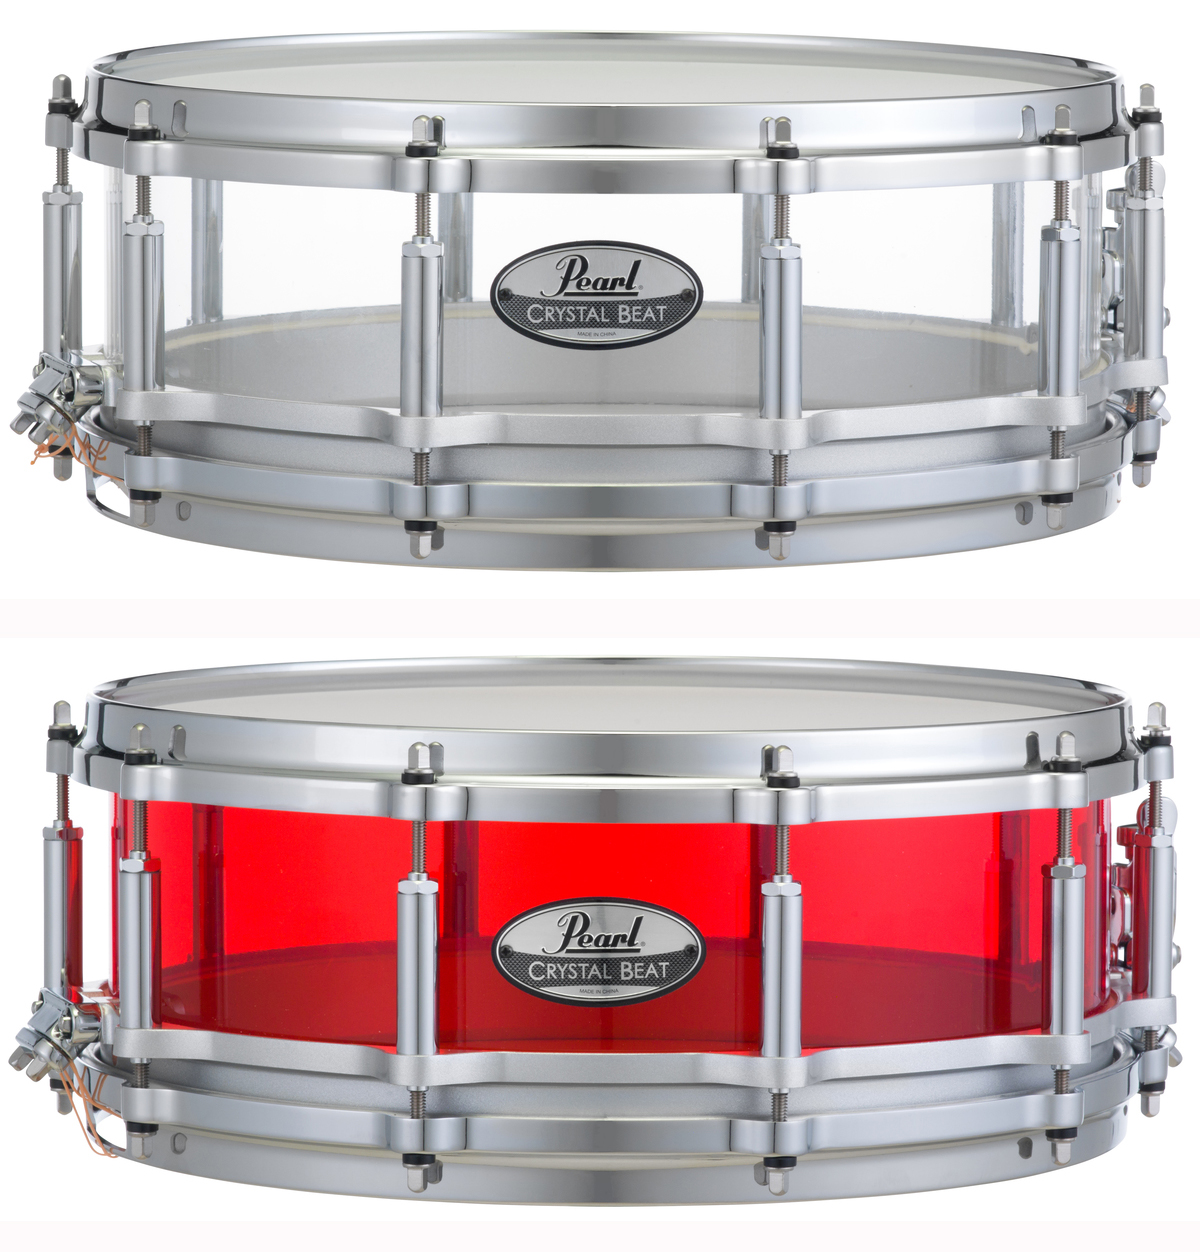 Pearl Crystal Beat Acrylic Free Floating Snare Drum - Just Drums